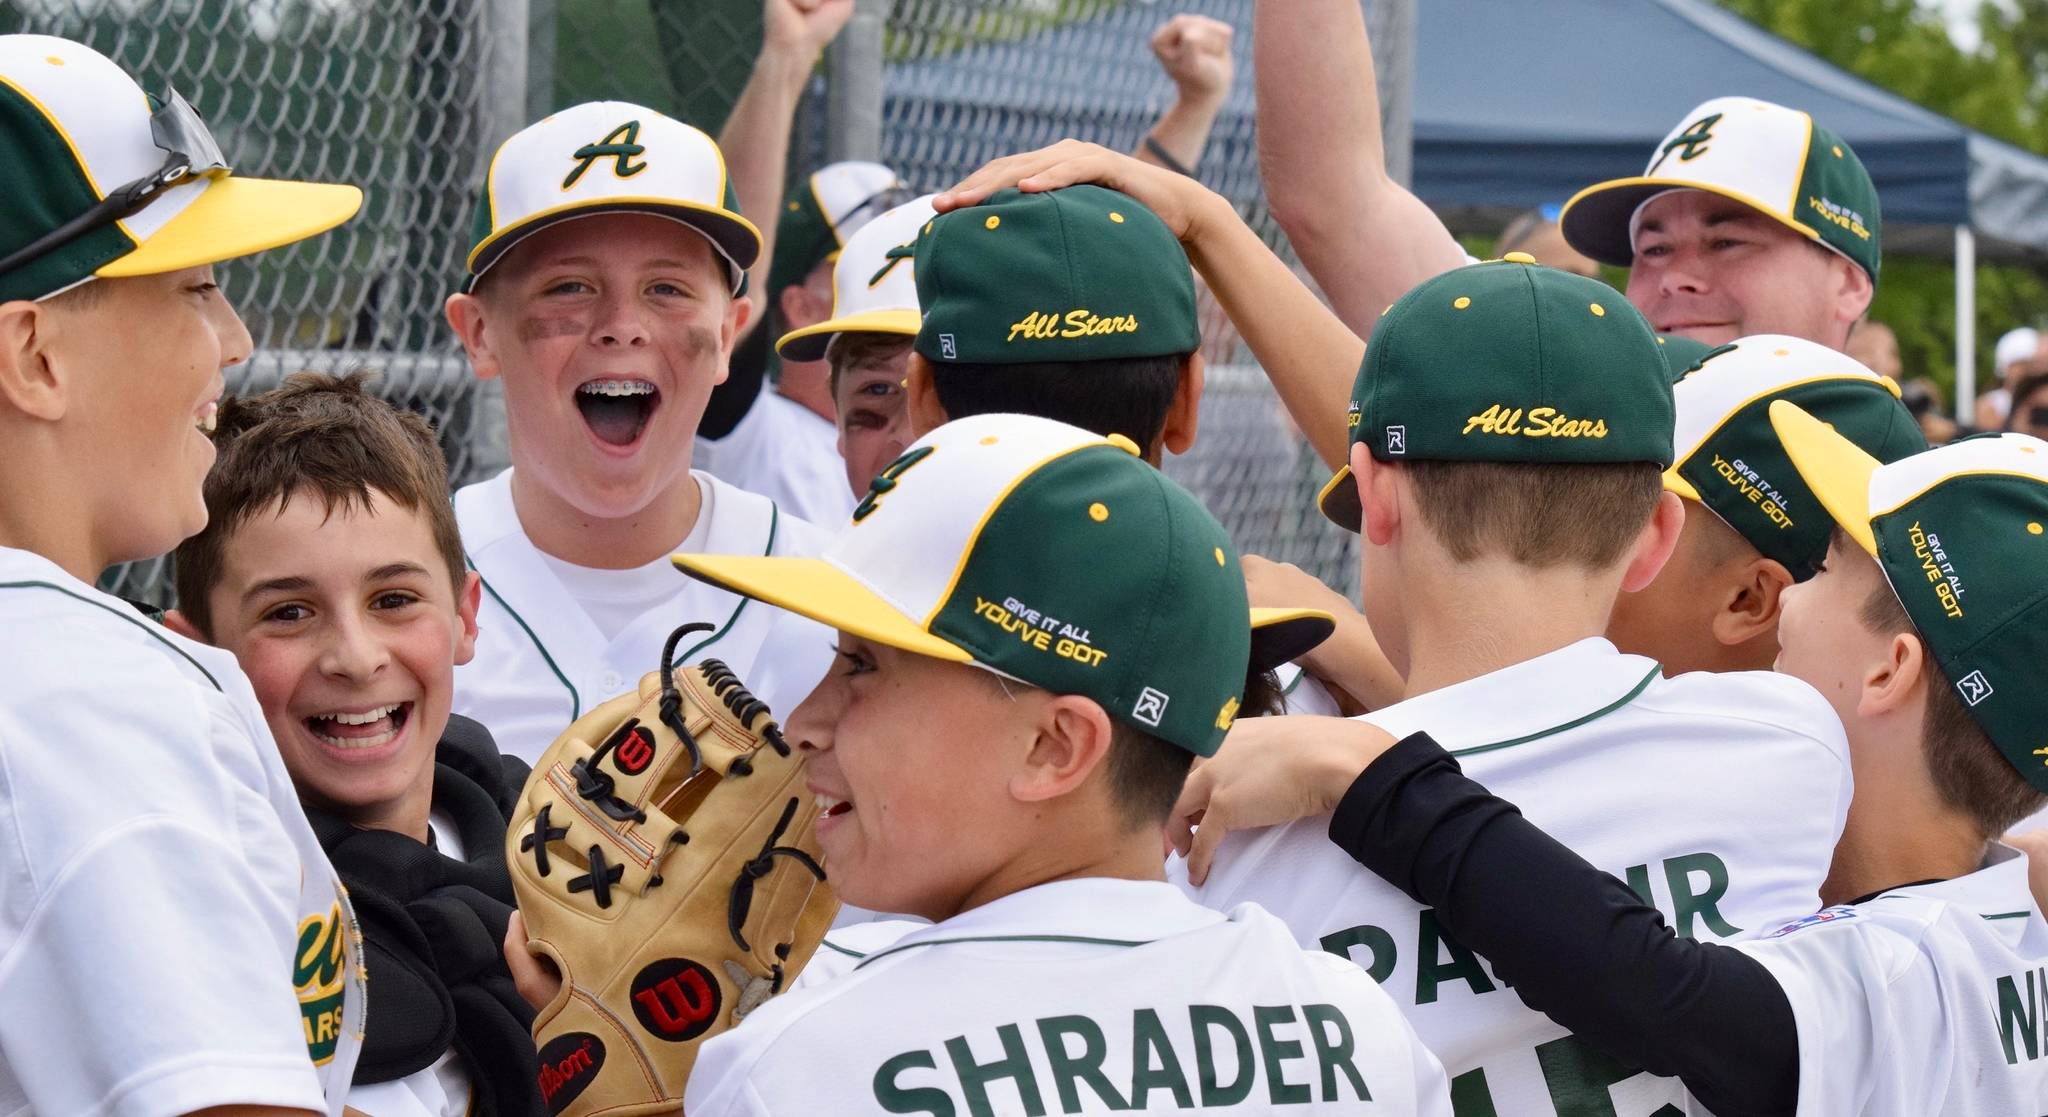 The Auburn All-Stars celebrate after defeating Kent 2-1 to take the District 10 Majors Little League title on Saturday at Sunset Park. RACHEL CIAMPI, Auburn Reporter